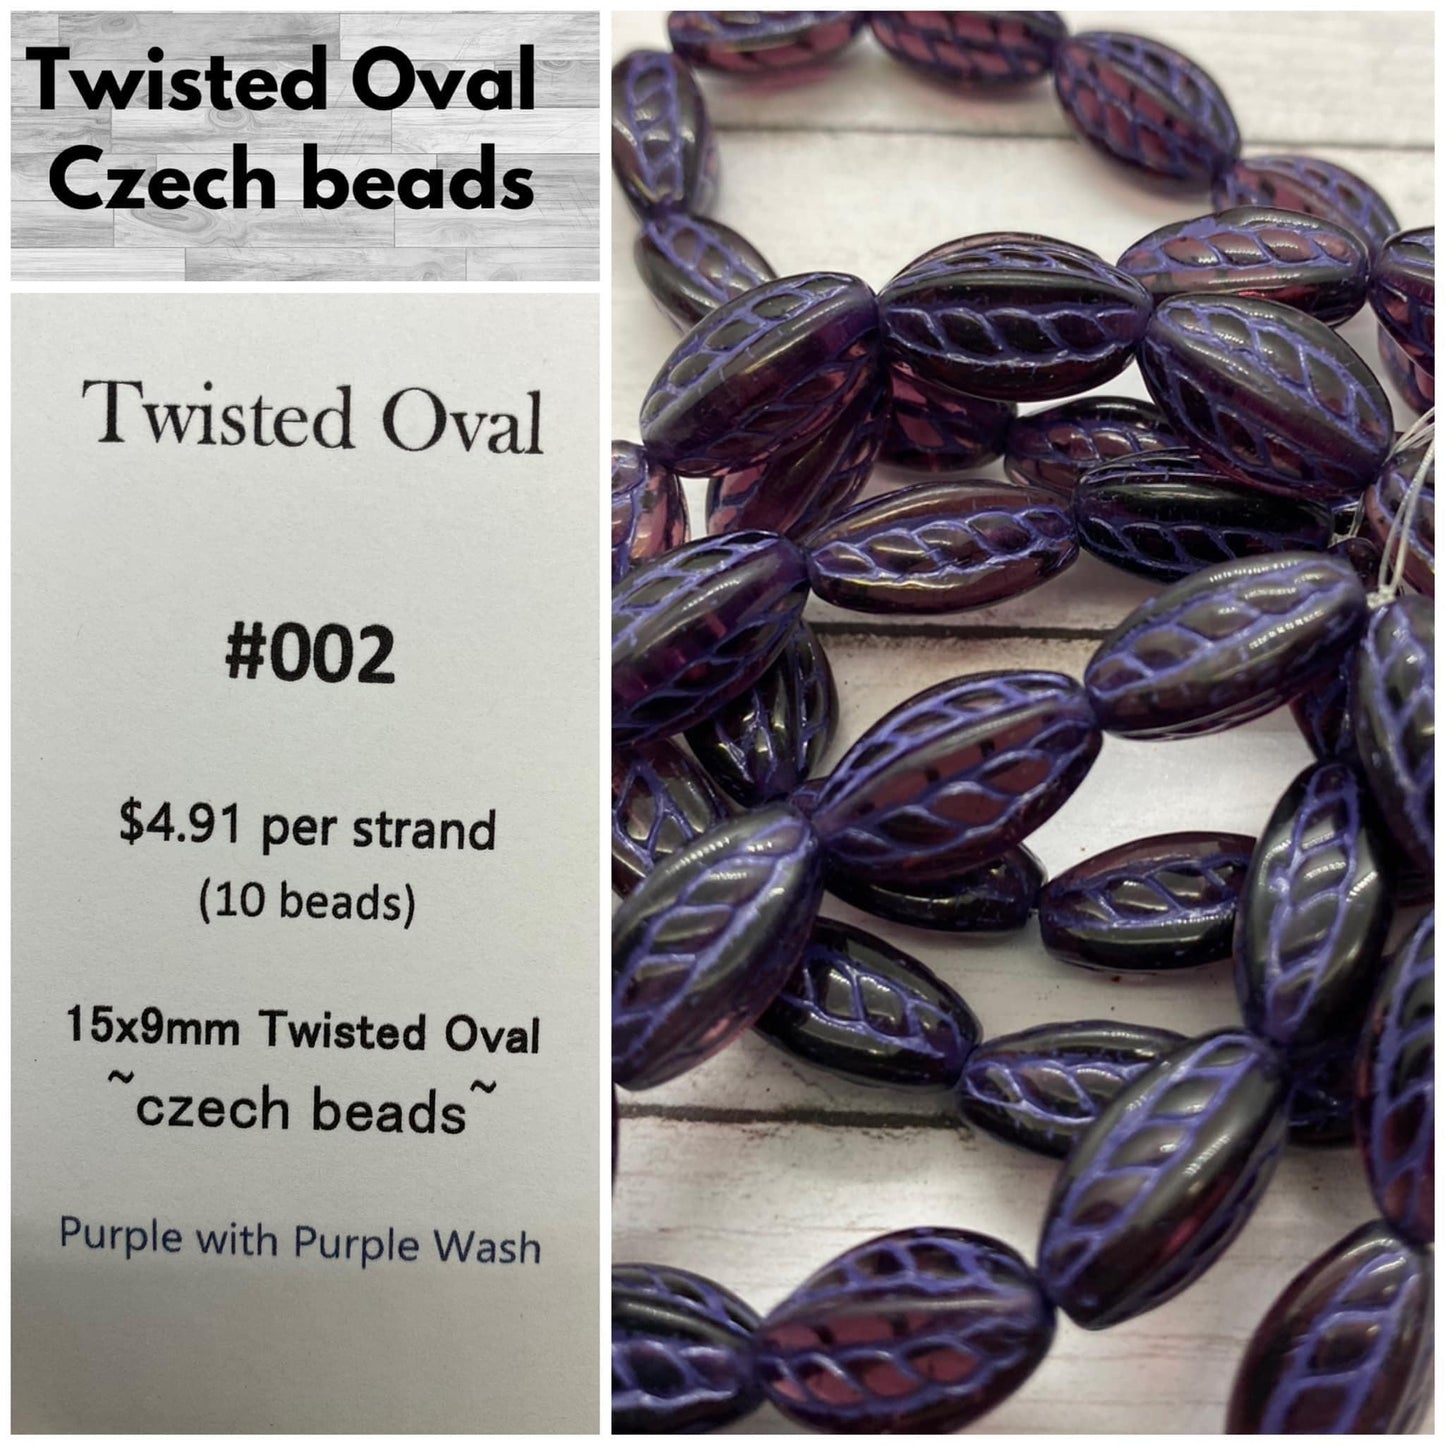 Twisted Oval 15x9mm #002